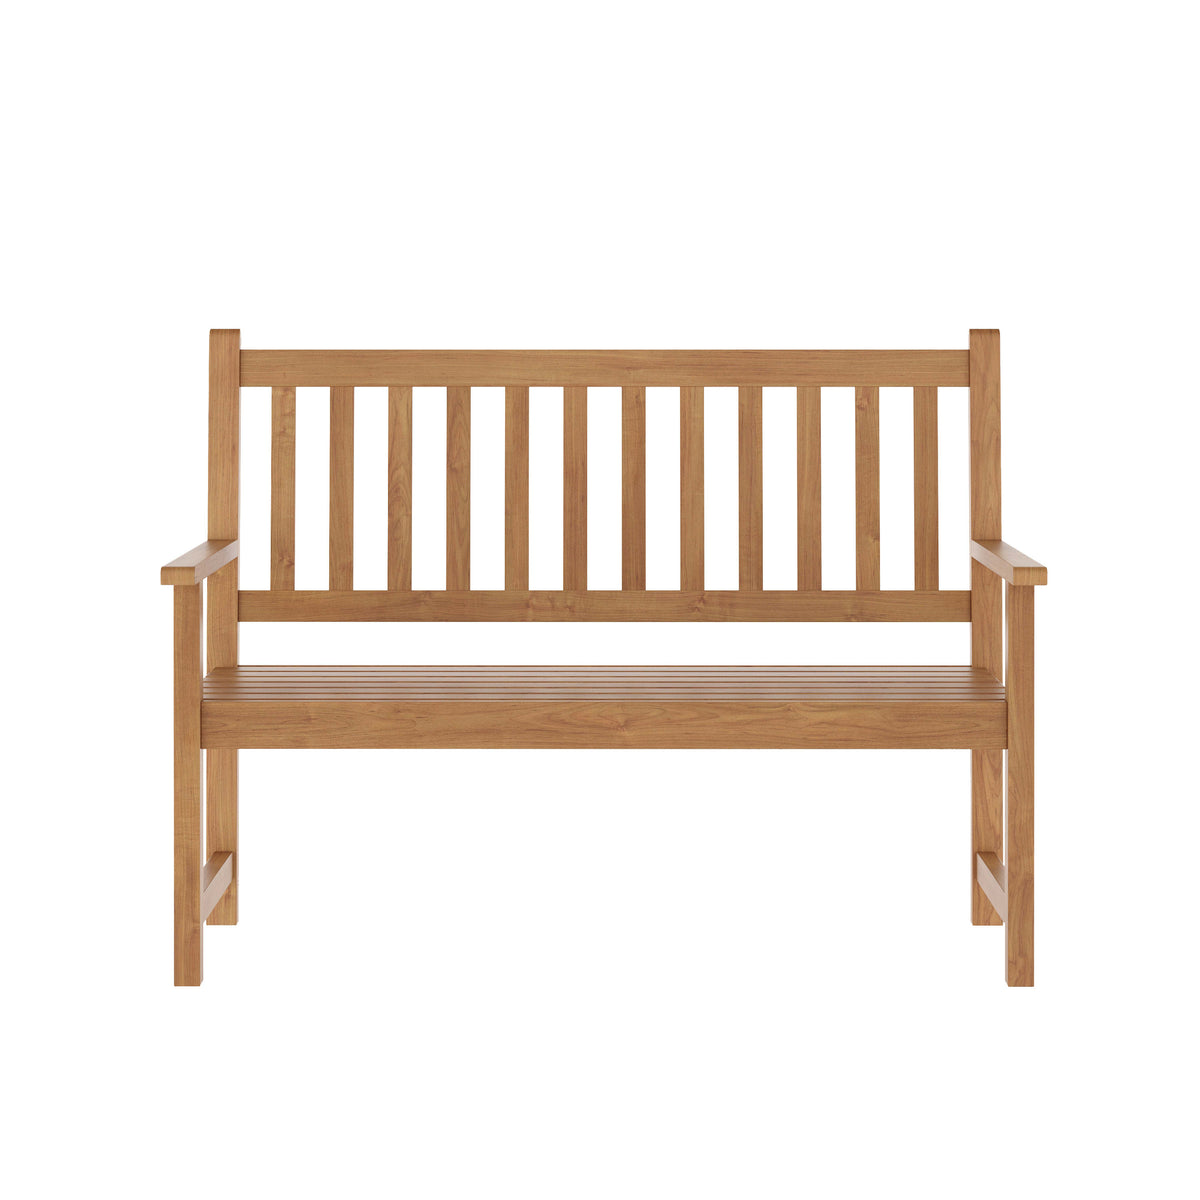 Brown |#| Commercial Indoor/Outdoor 2-Person Patio Acacia Wood Bench Loveseat in Brown